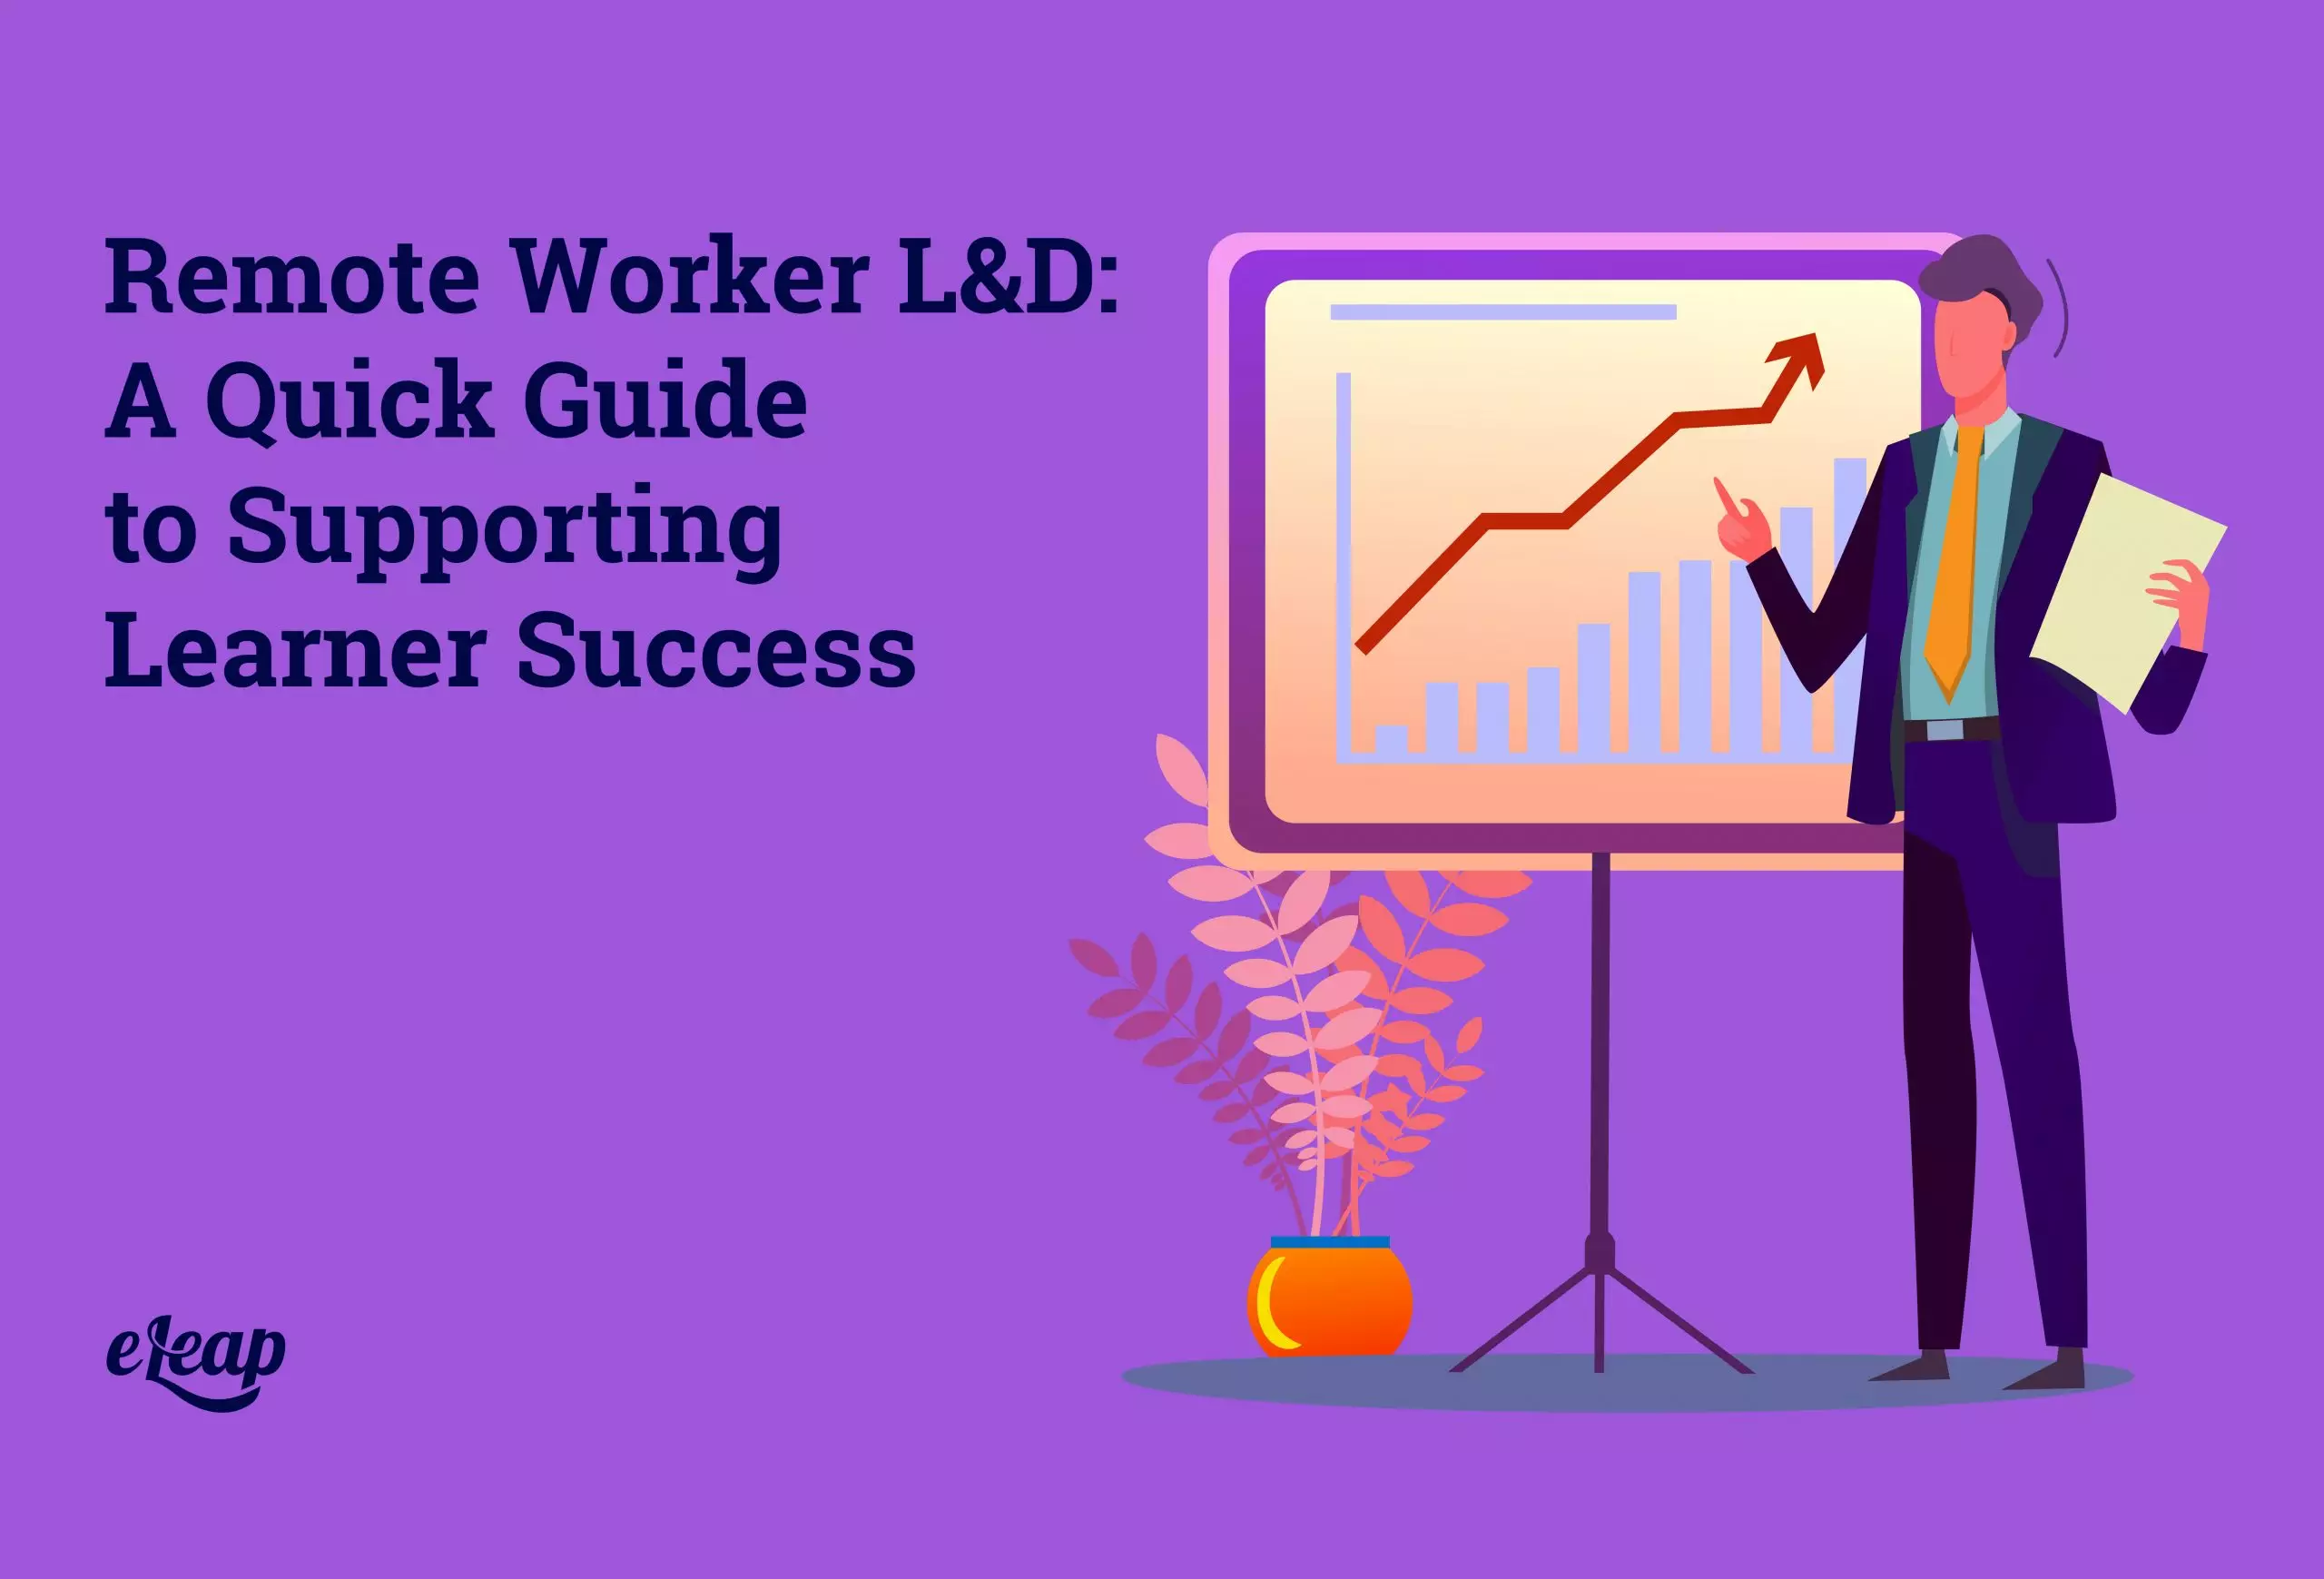 Remote Worker L&D: A Quick Guide to Supporting Learner Success